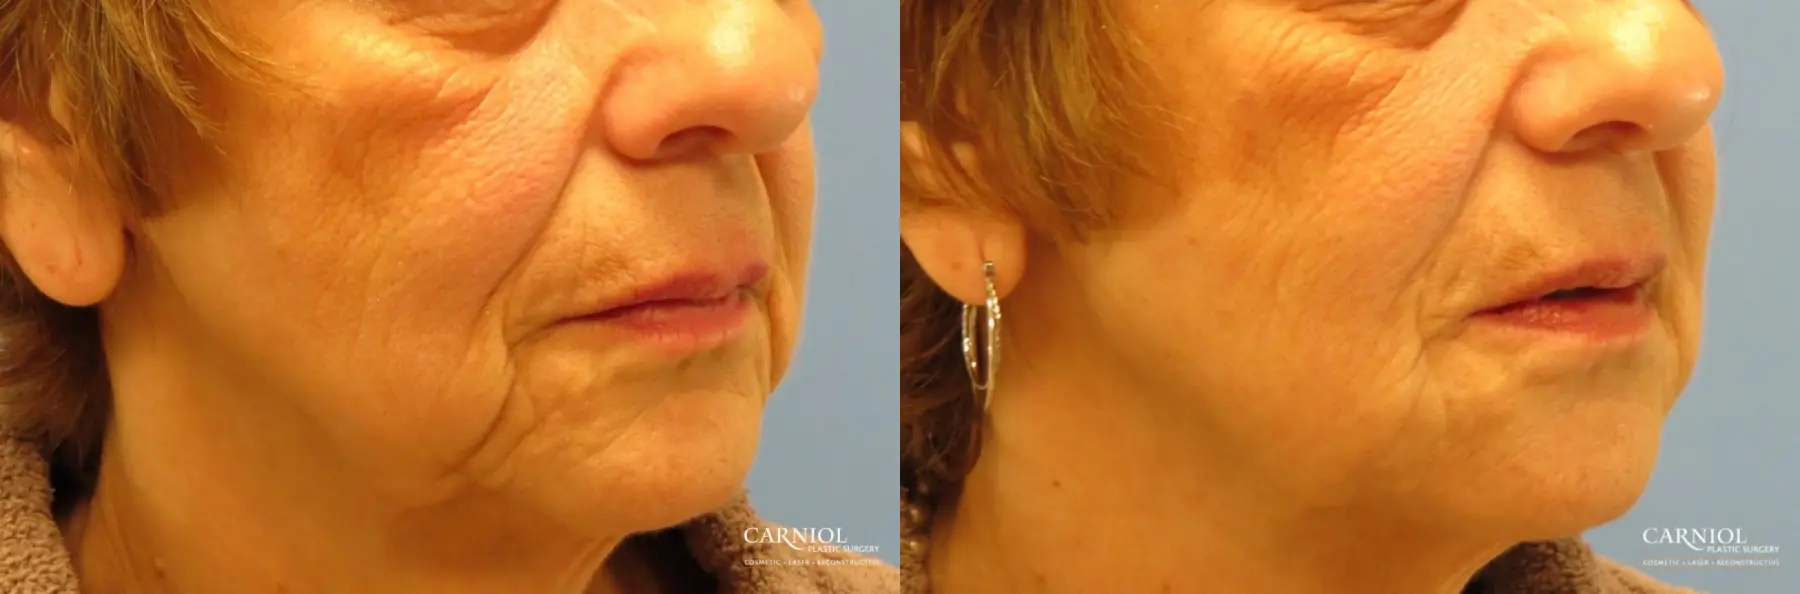 Non-Surgical Facelift: Patient 1 - Before and After 2